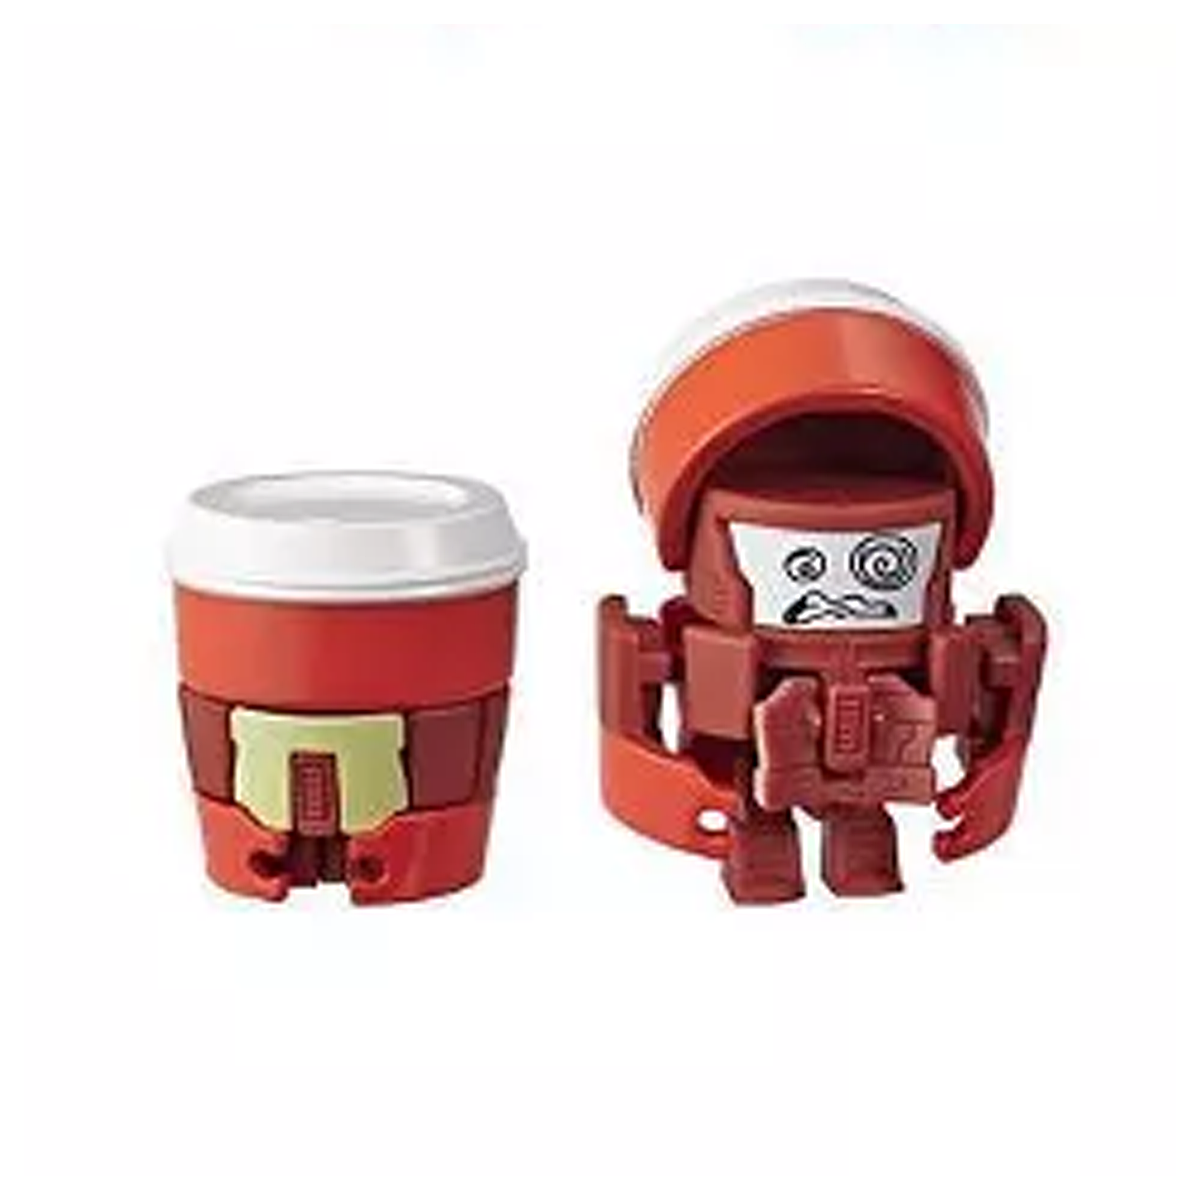 LATTE SPICE WHIRL Transformers BotBots Series 3 Fresh Squeezes Pumpkin Spice